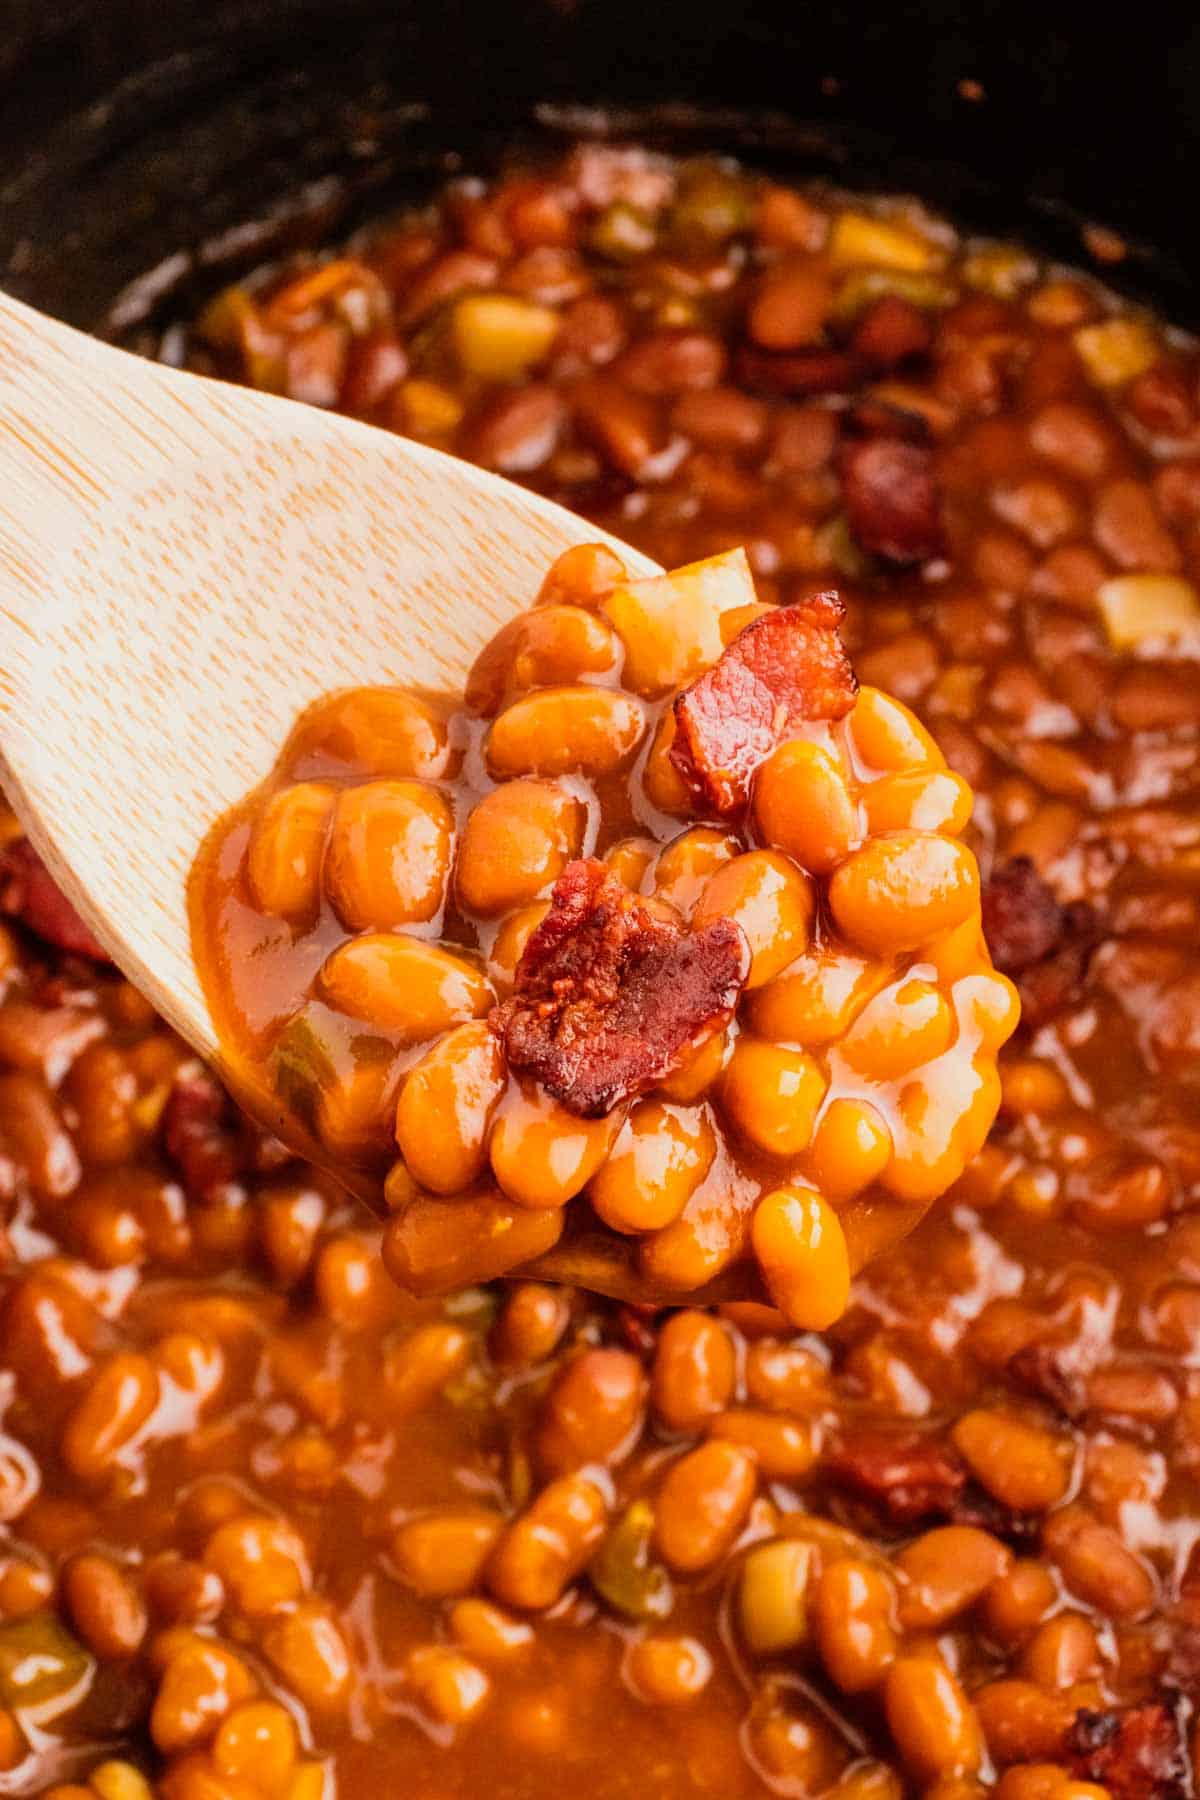 Crock Pot Baked Beans are a simple slow cooker side dish recipe made with canned baked beans, barbecue sauce, ketchup, brown sugar, bell peppers, onions and bacon.